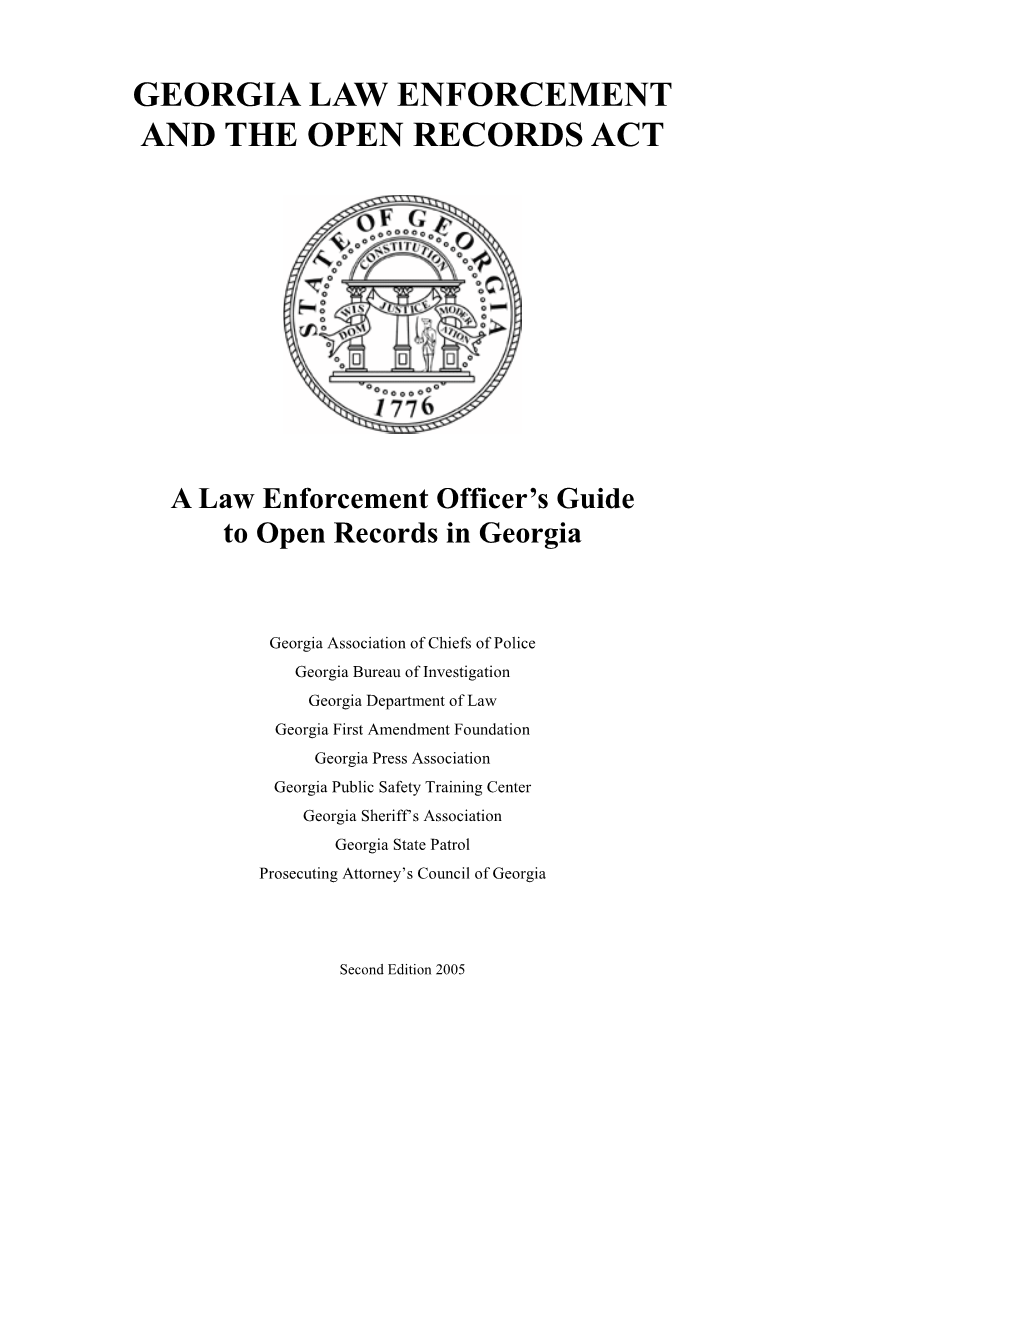 Georgia Law Enforcement and the Open Records Act